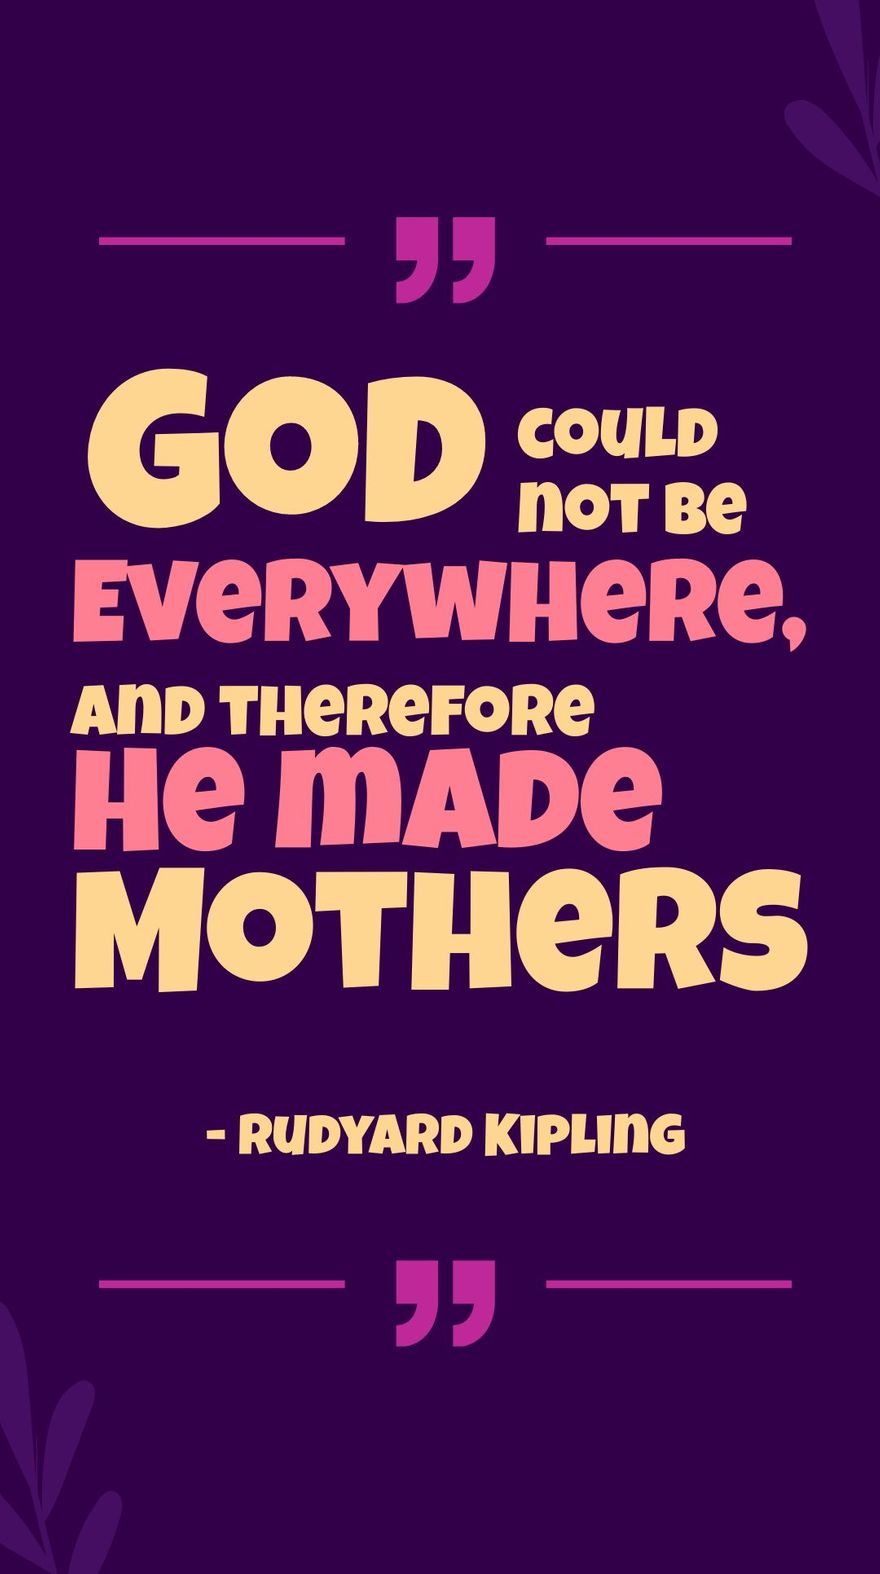 Free Rudyard Kipling - God could not be everywhere, and therefore he made mothers.  in JPG